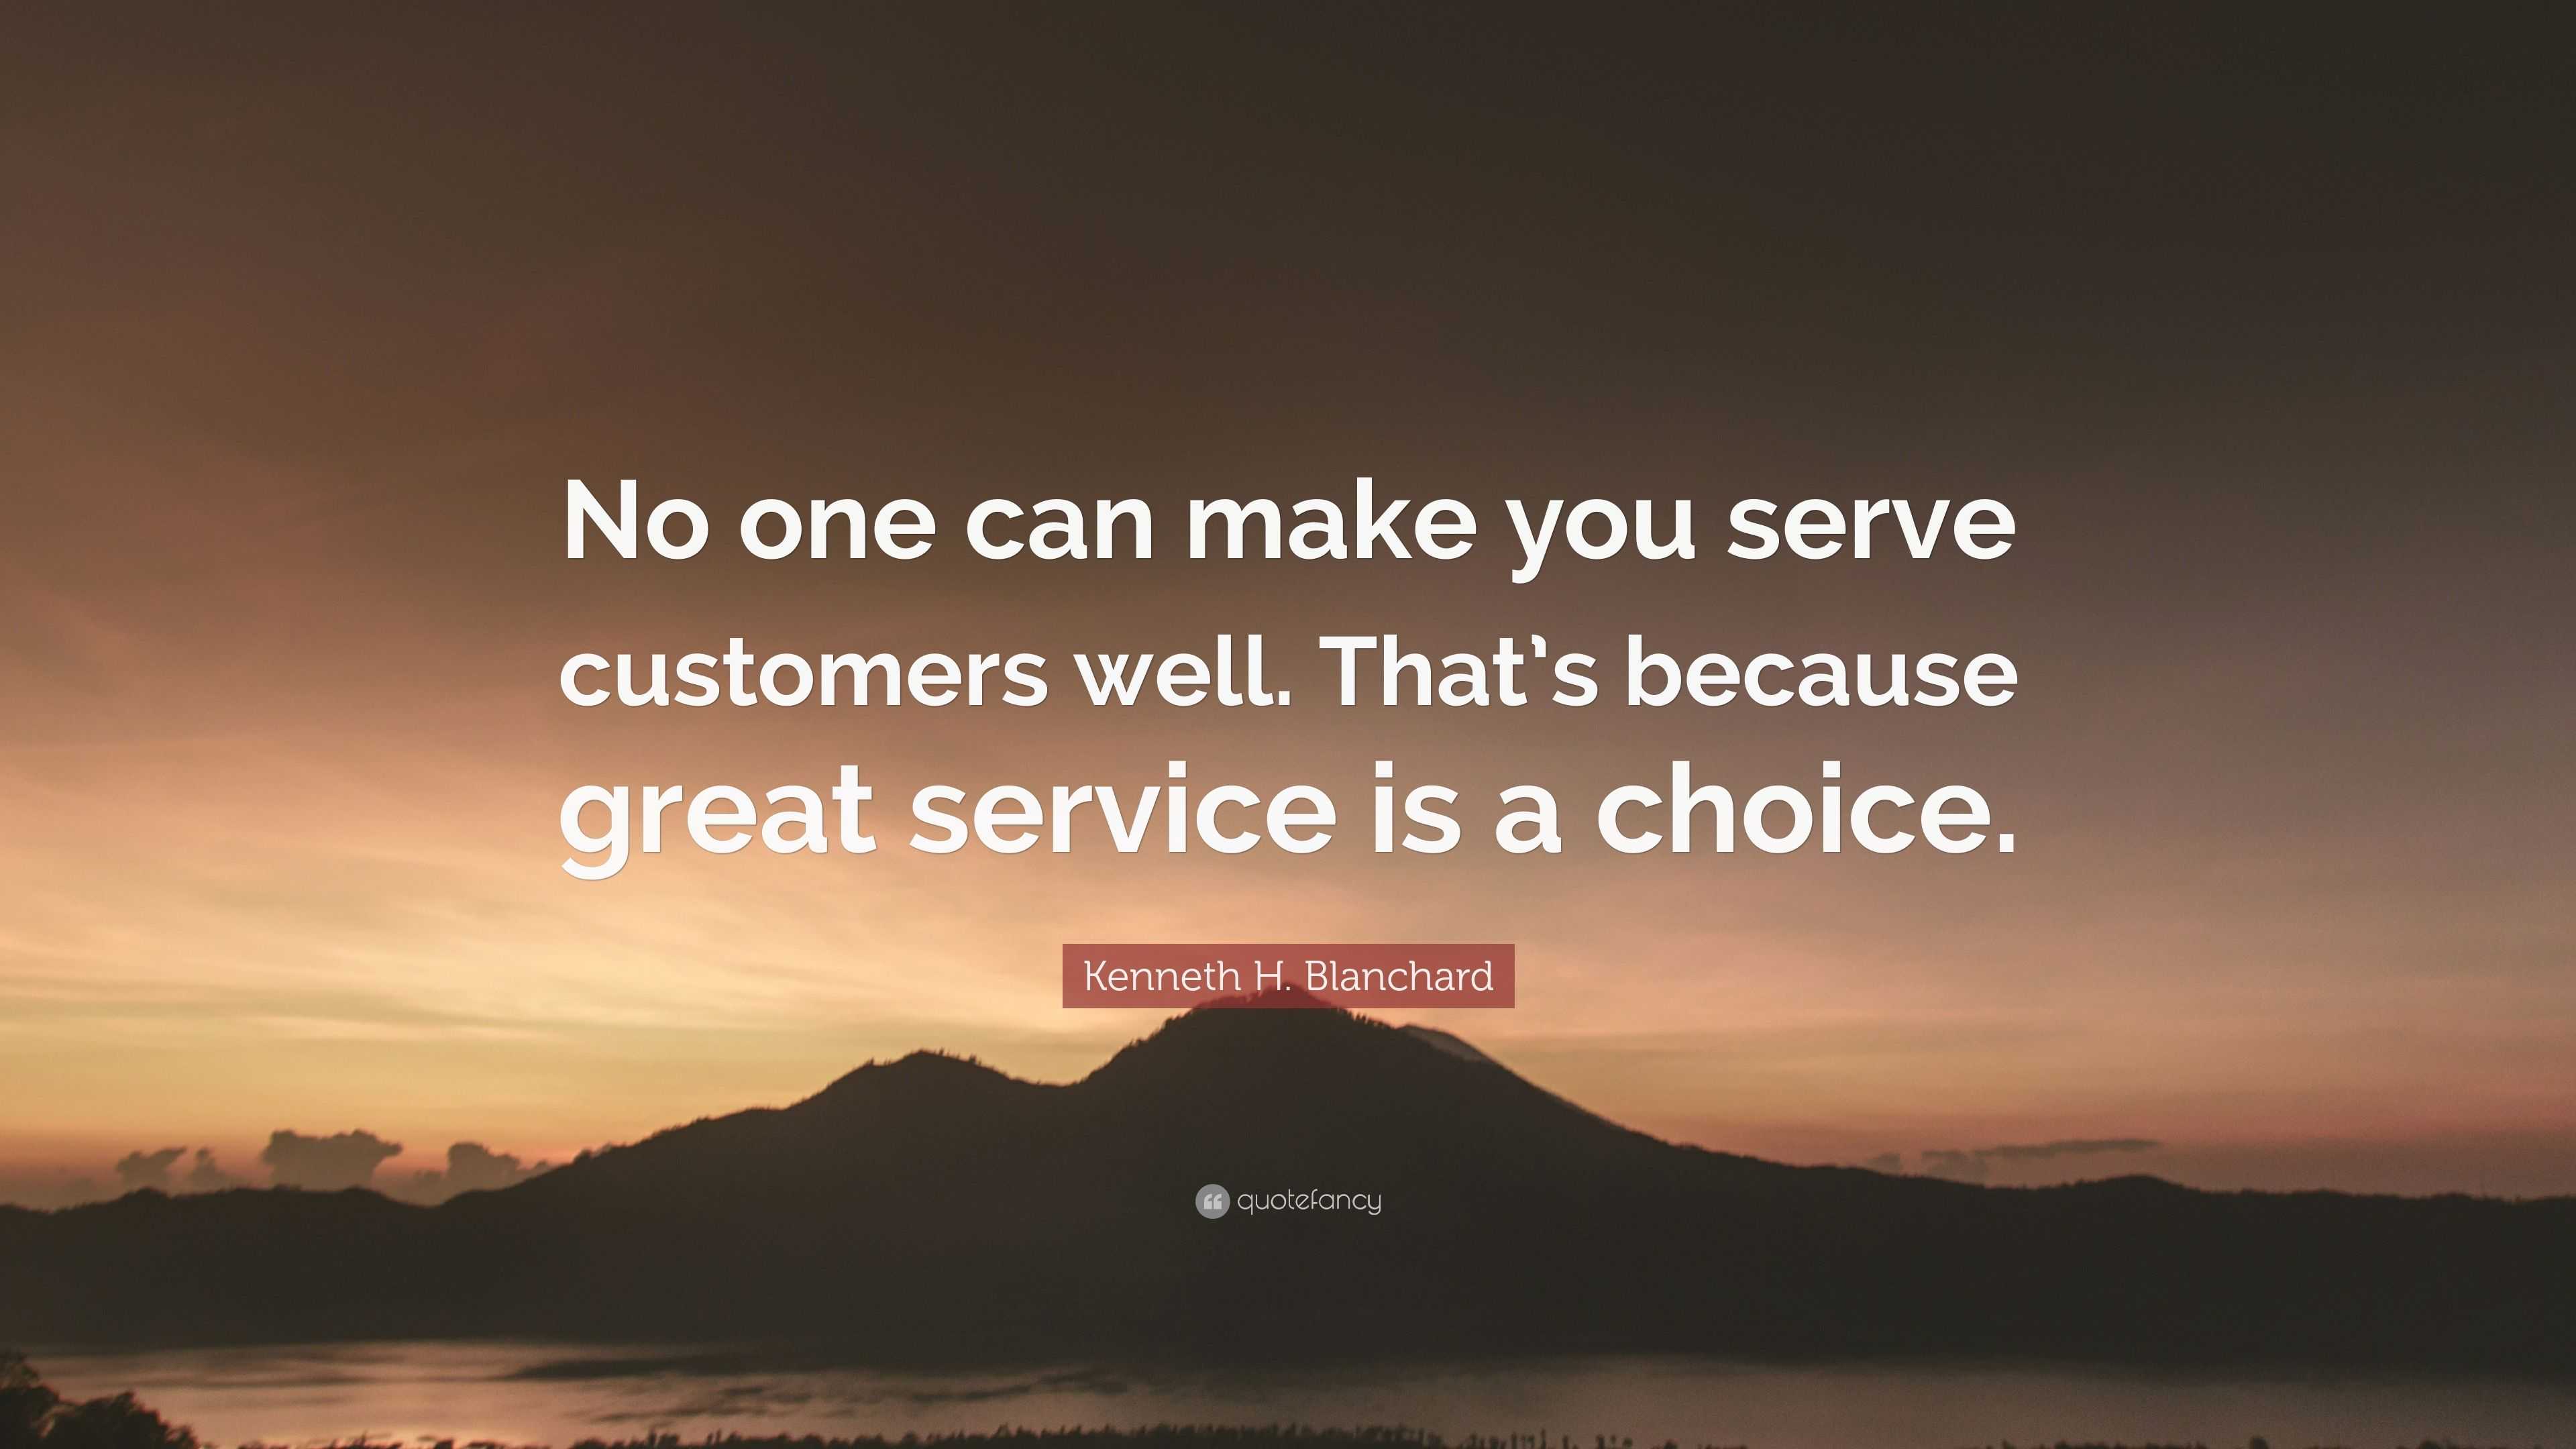 H. Blanchard Quote “No one can make you serve customers well